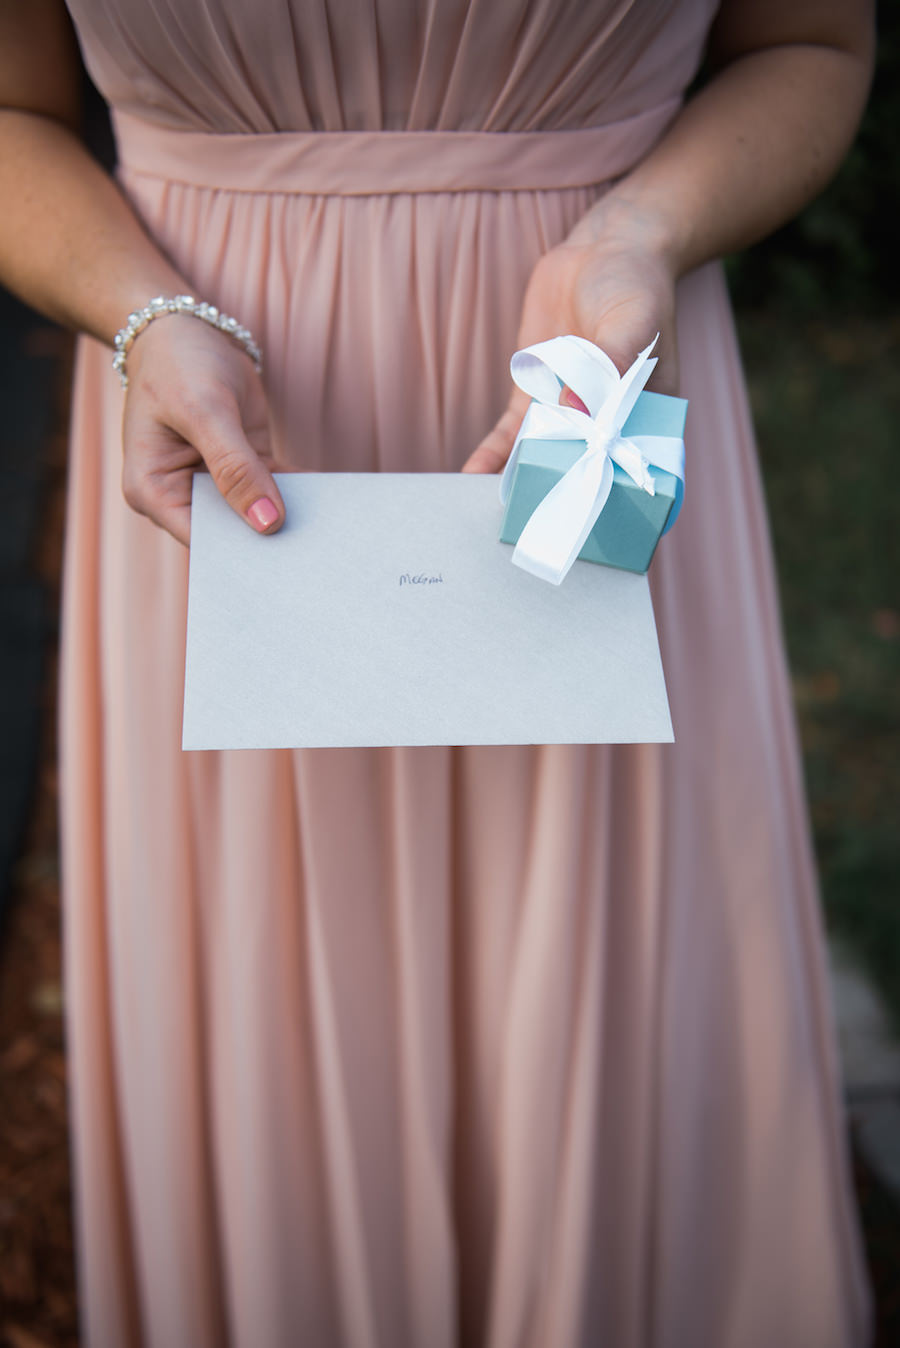 Blush Bridesmaid Adrianna Papell Gown Holding Tiffany's Jewelry Gift Box | Tampa Bay Wedding Photographer Kera Photography